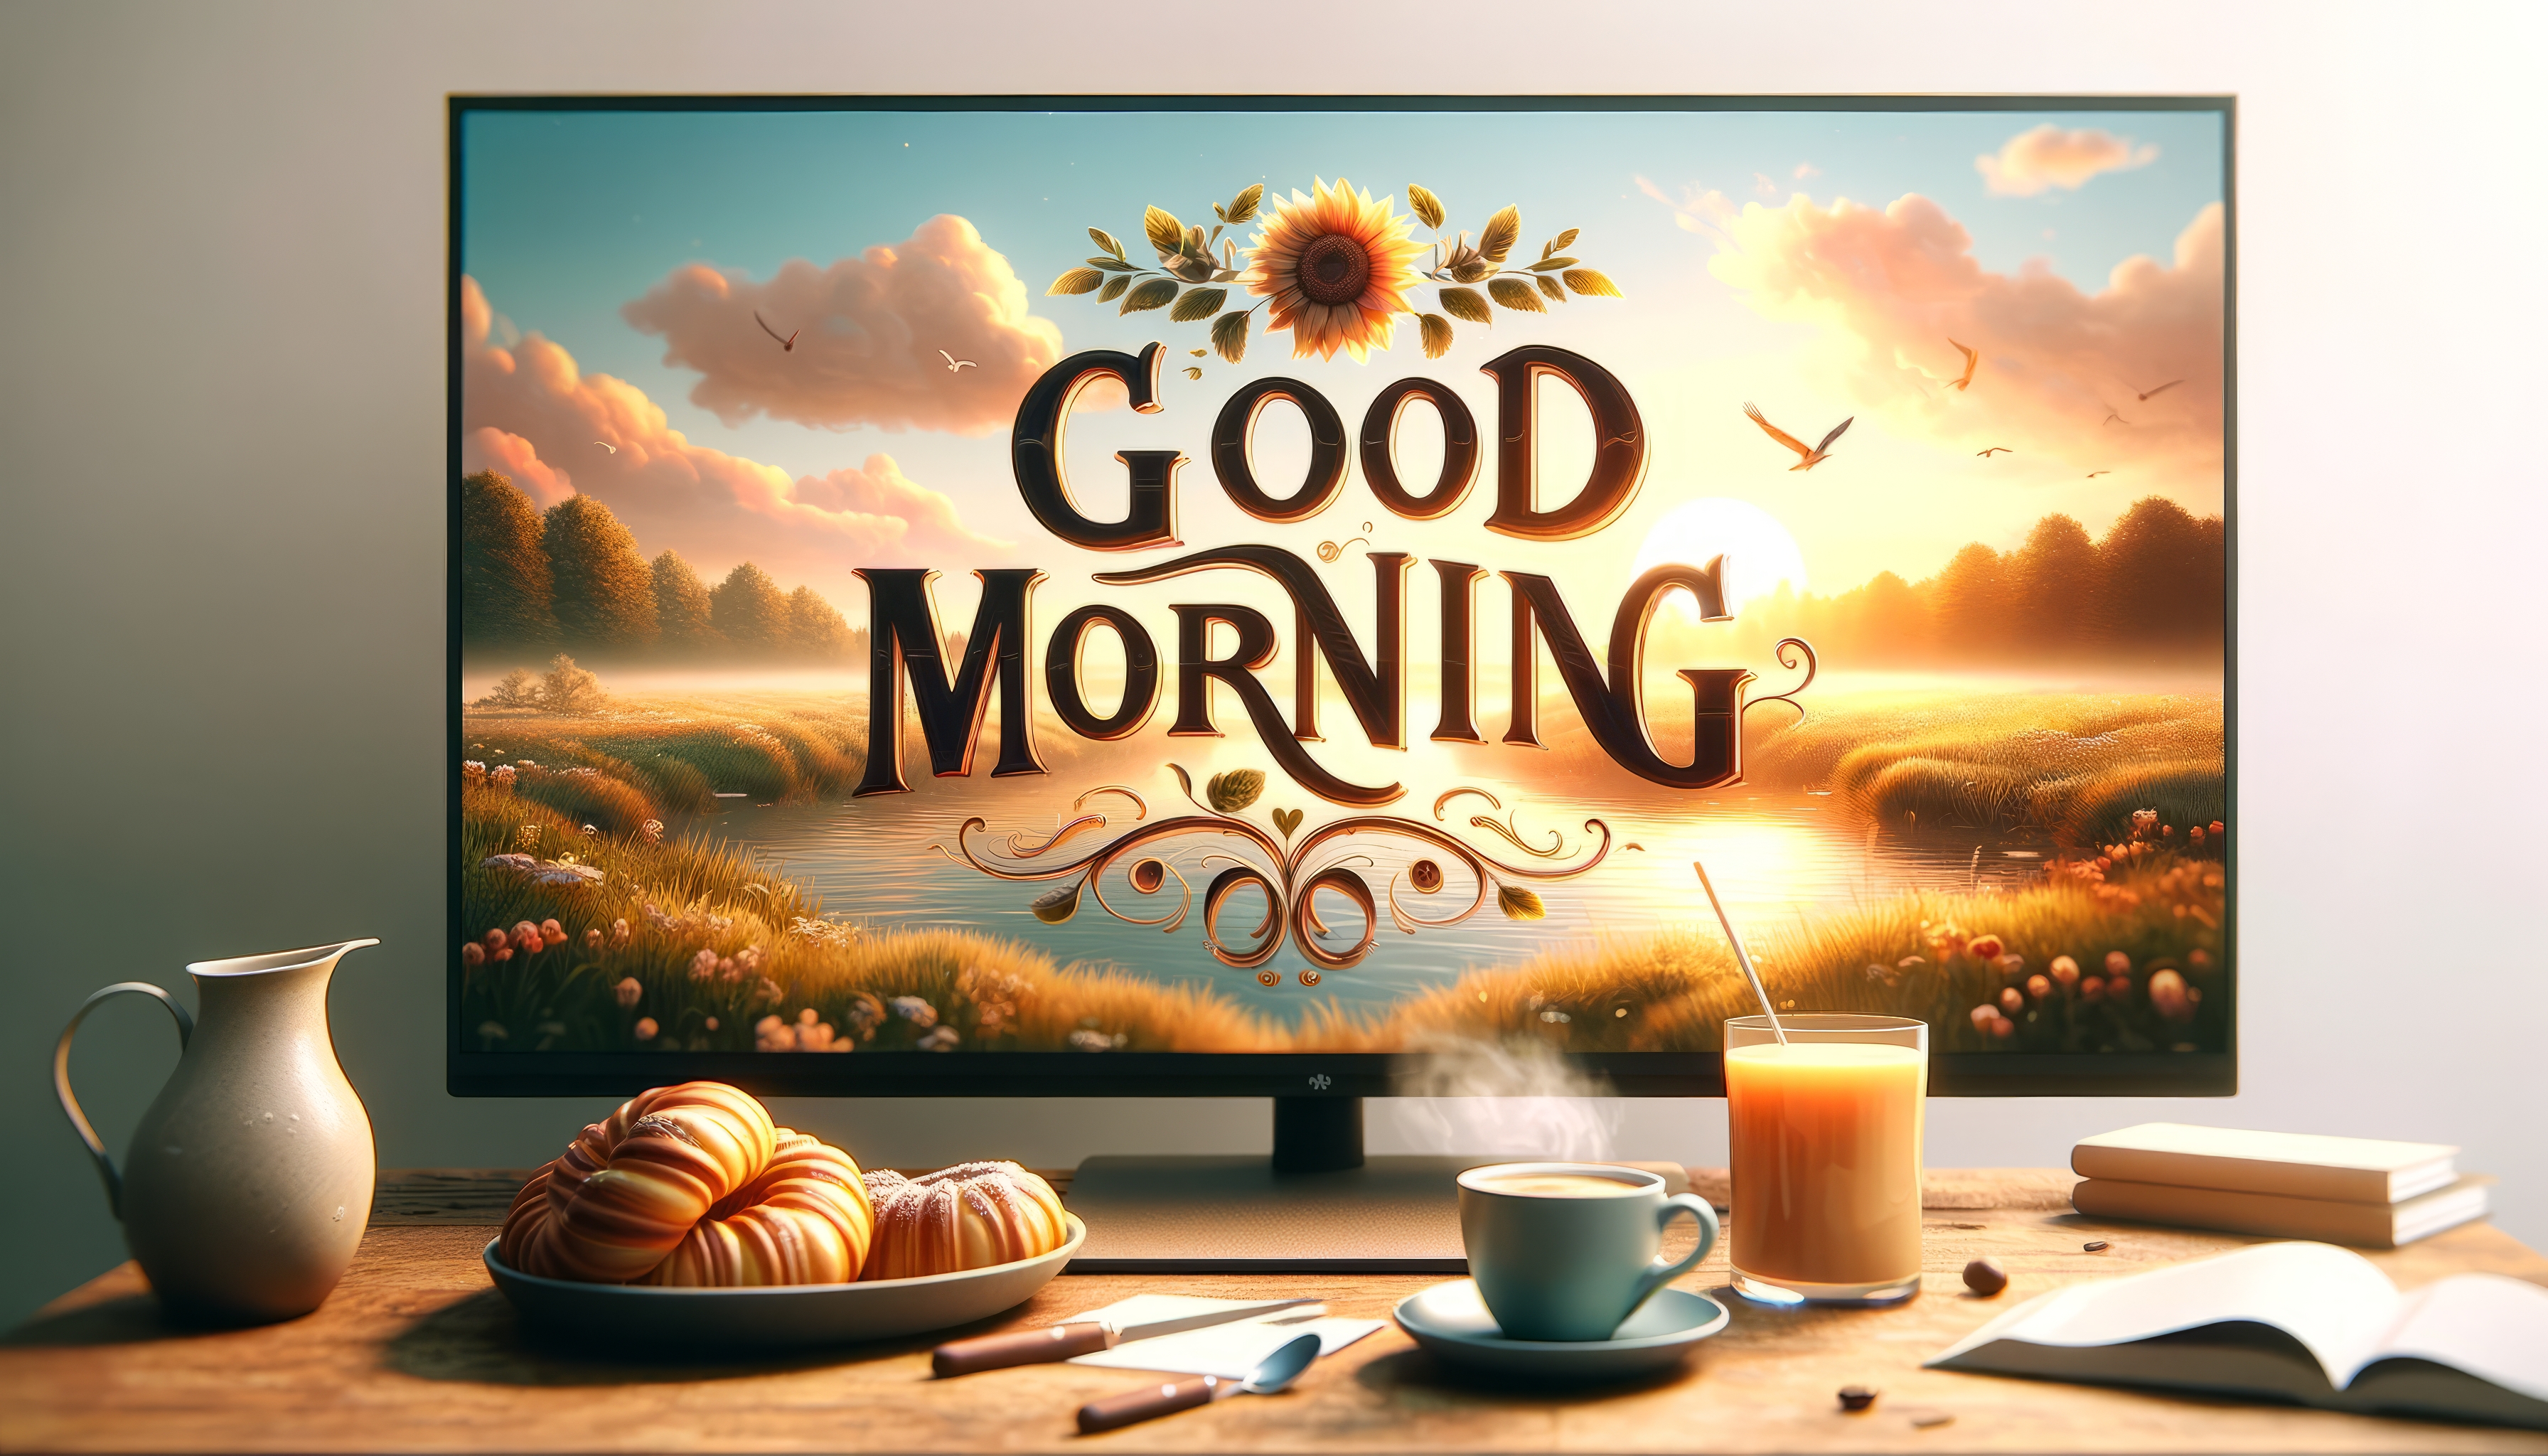 HD desktop wallpaper featuring a Good Morning message with a serene sunrise landscape, accompanied by a breakfast setup with coffee and pastries.